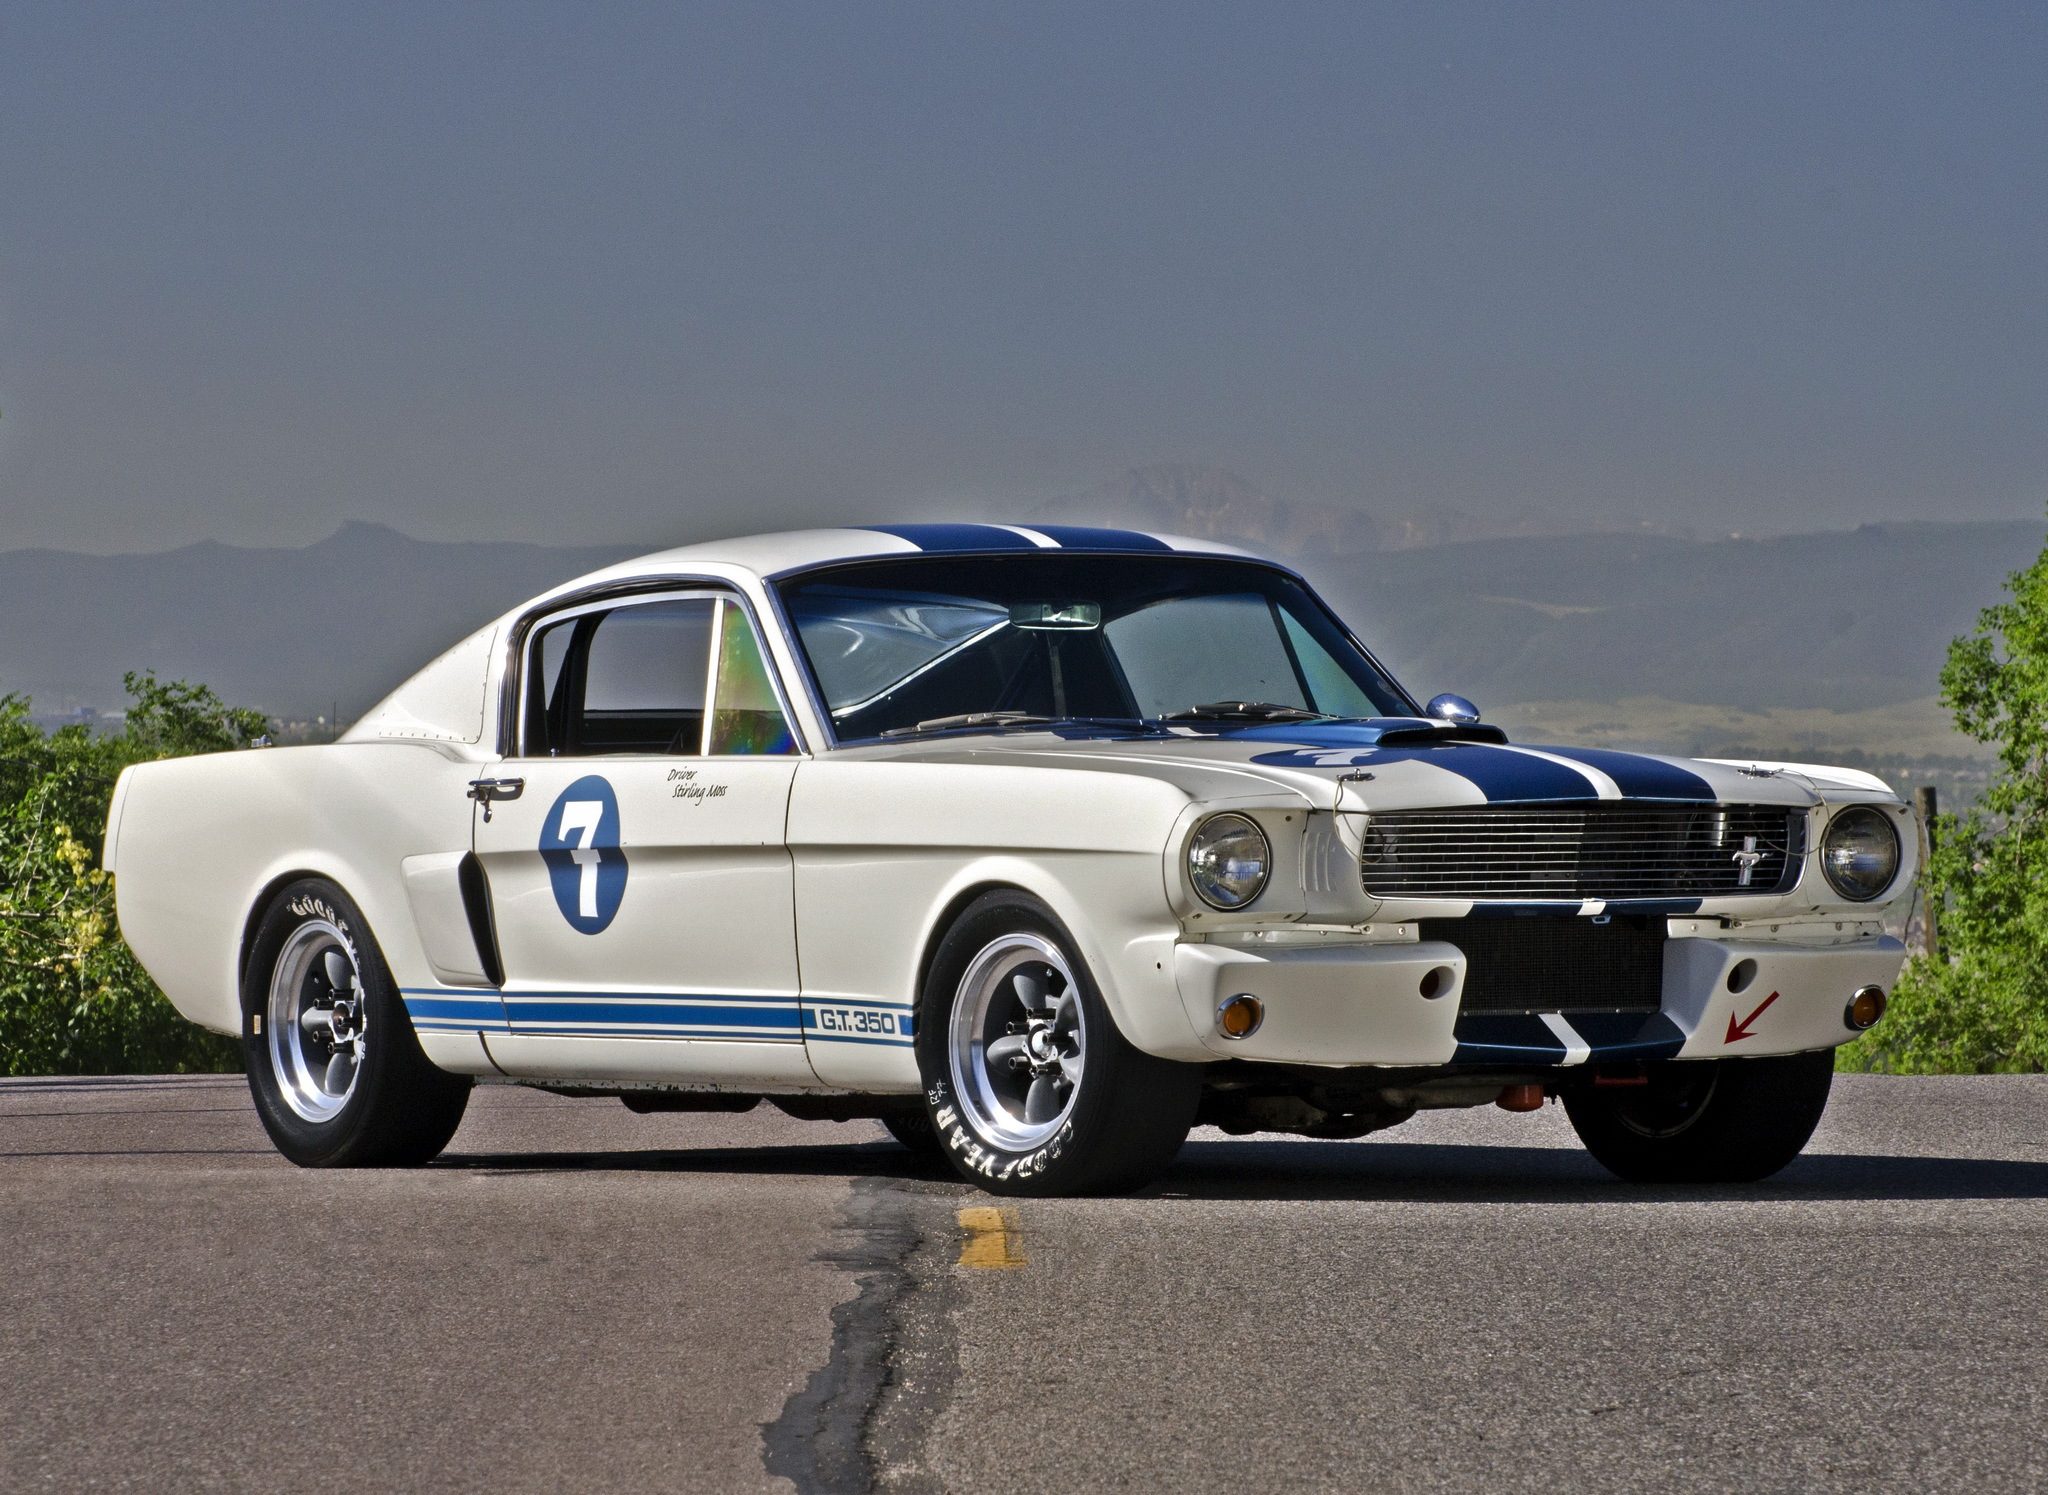 Mustang Of The Day: 1965 Shelby GT350R